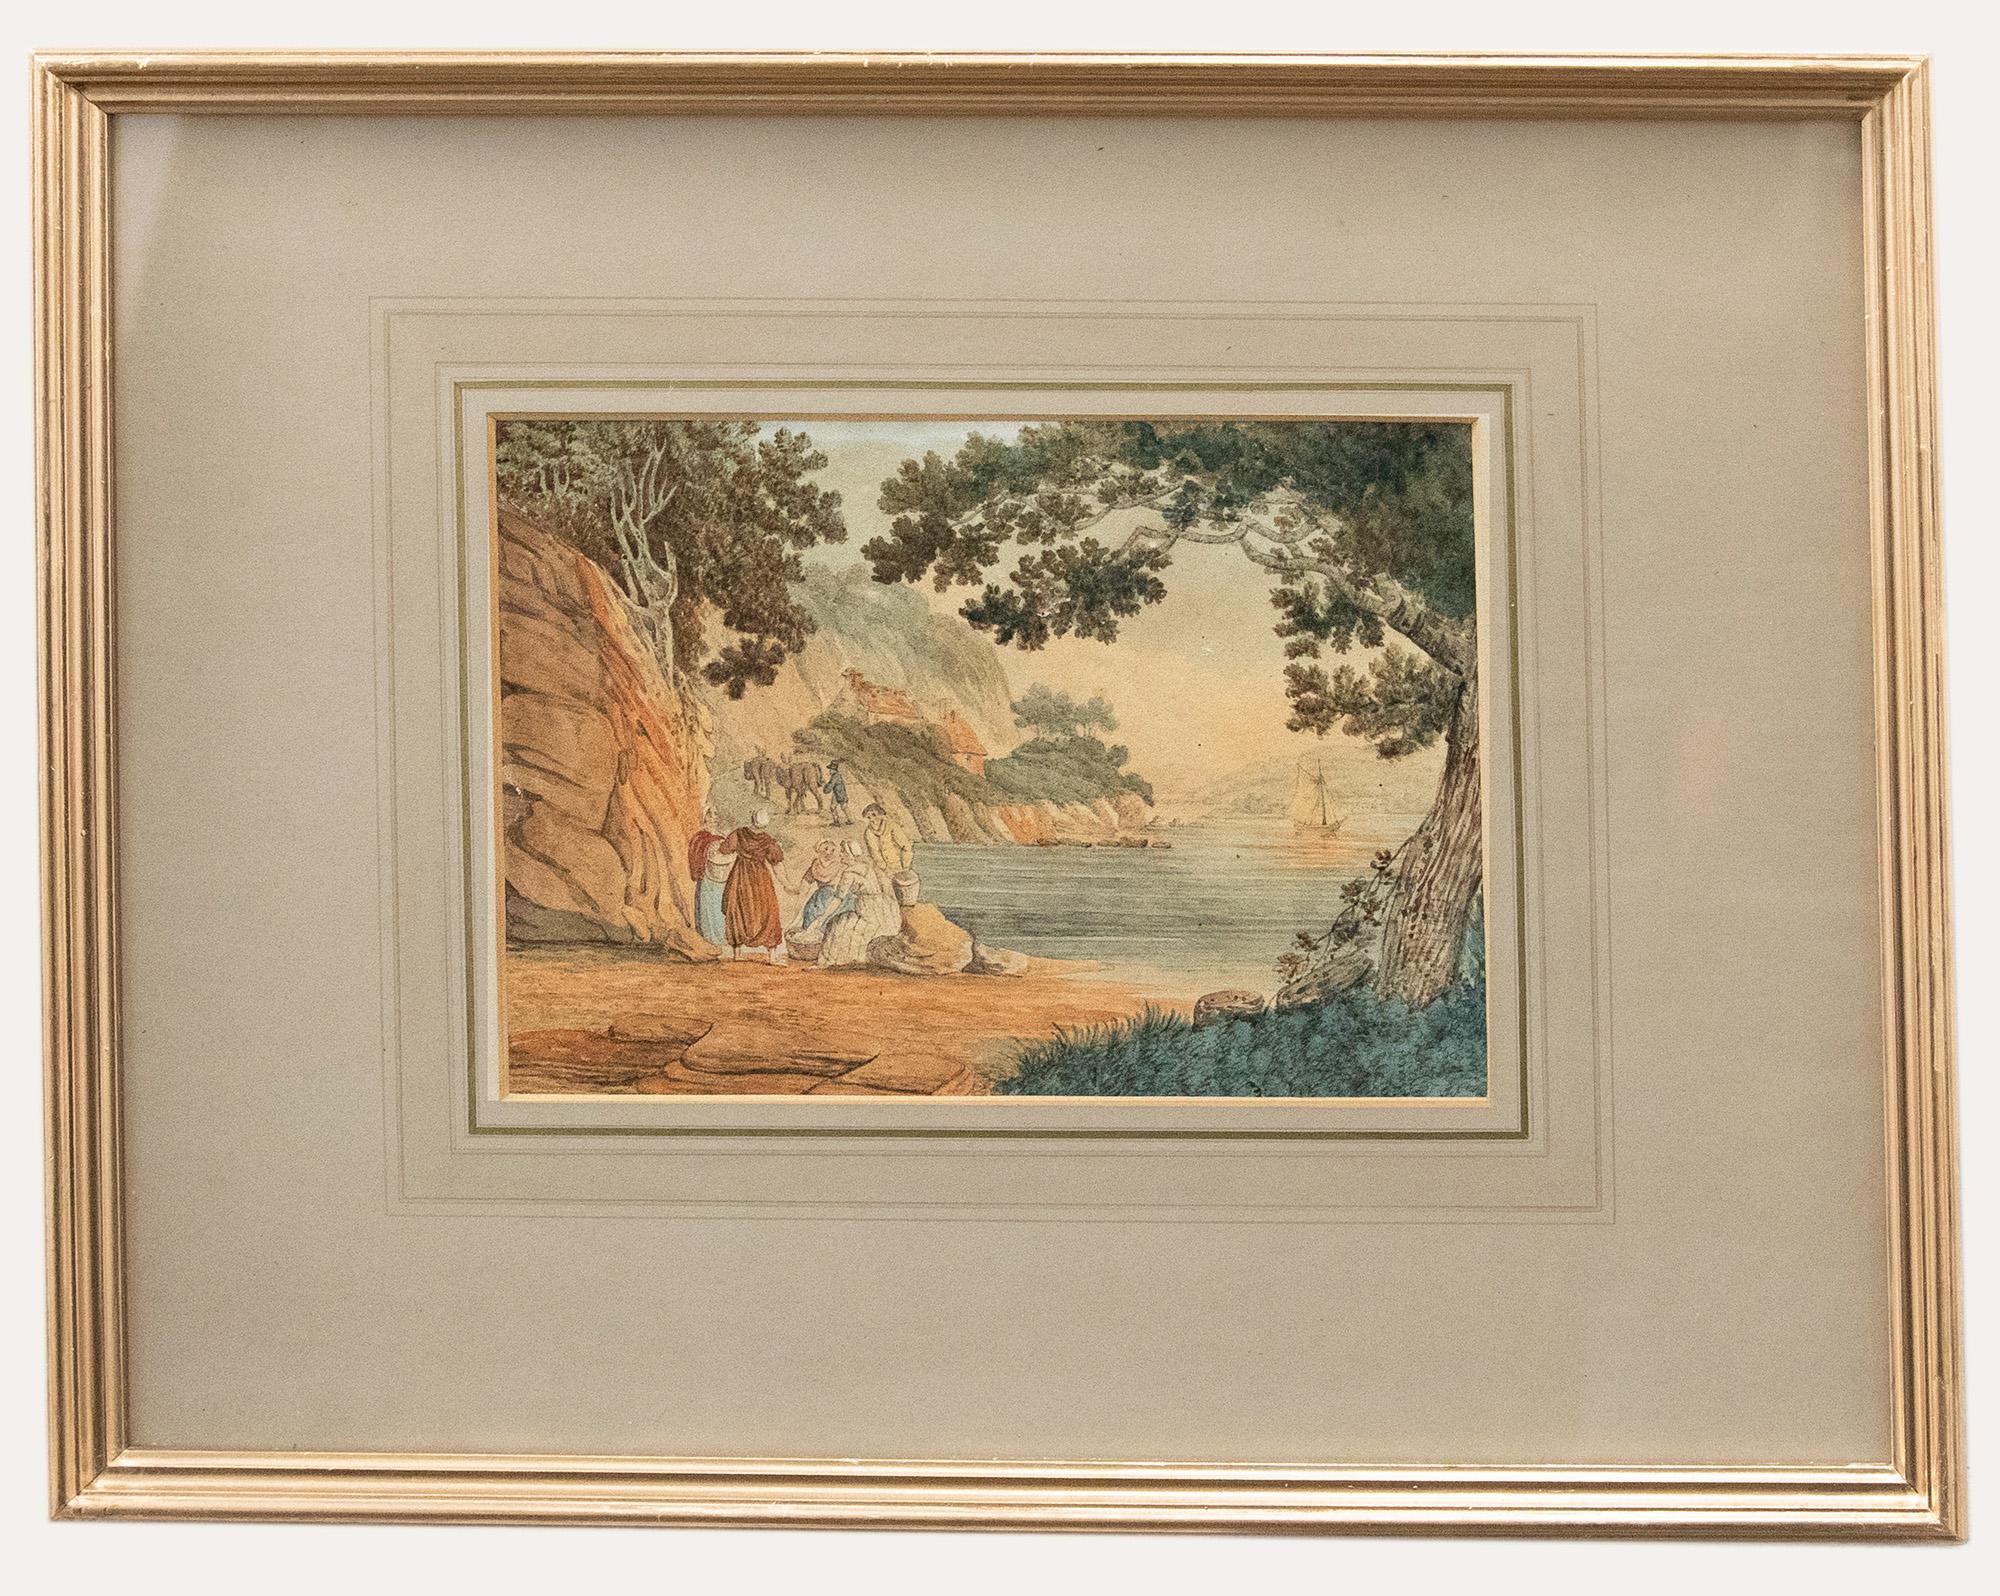 This delightful watercolour, aattributed to the British artist William Payne (1760-1830) depicts an idyllic stretch of English coastline with figures washing laundry by the water's edge. The watercolour has been presented in an attractive